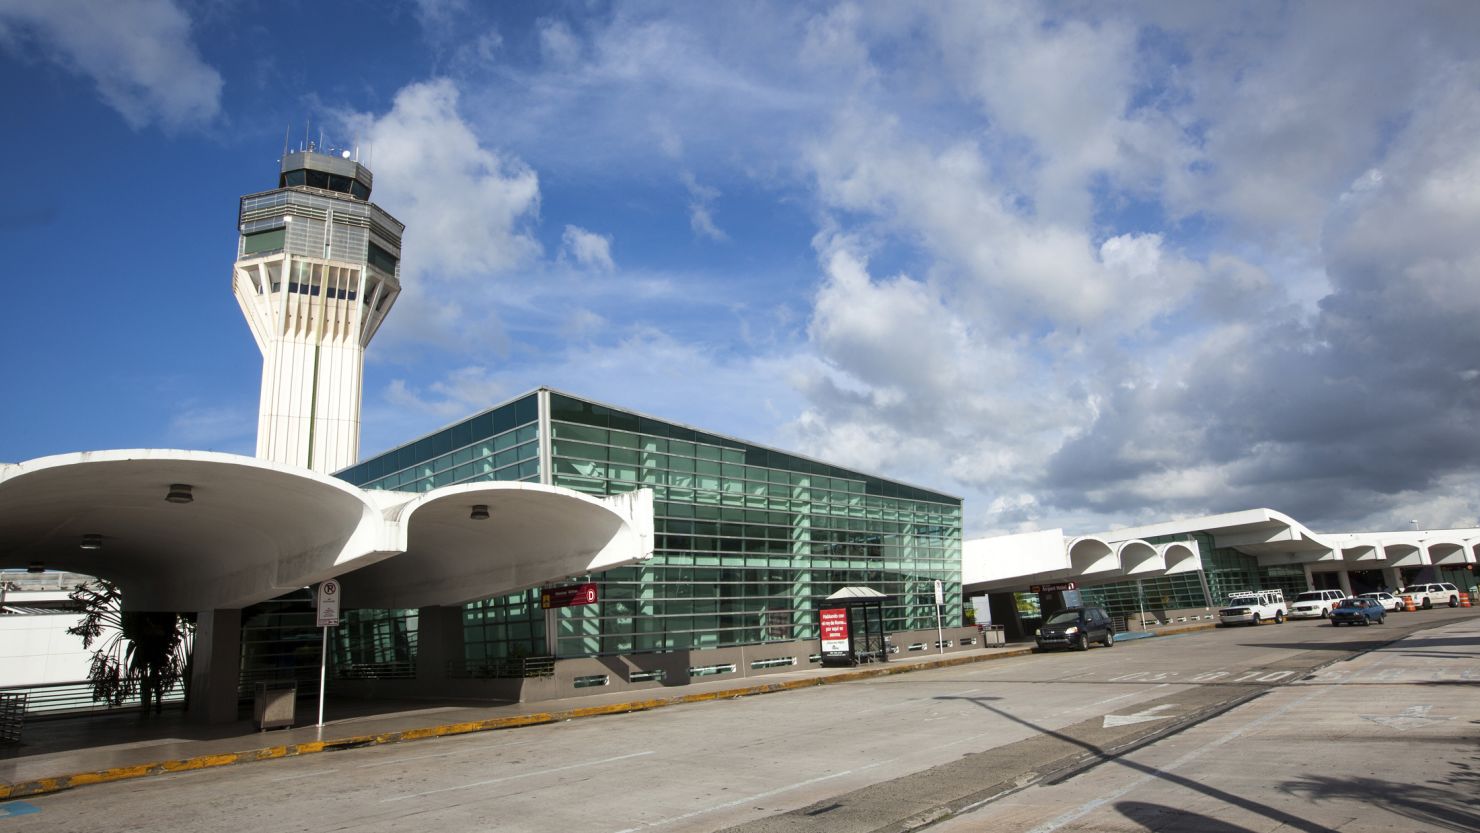 Hundreds of federal and state agents were conducting sweeps of Puerto Rico's main airport Wednesday in an anti-drug trafficking operation, officials said.